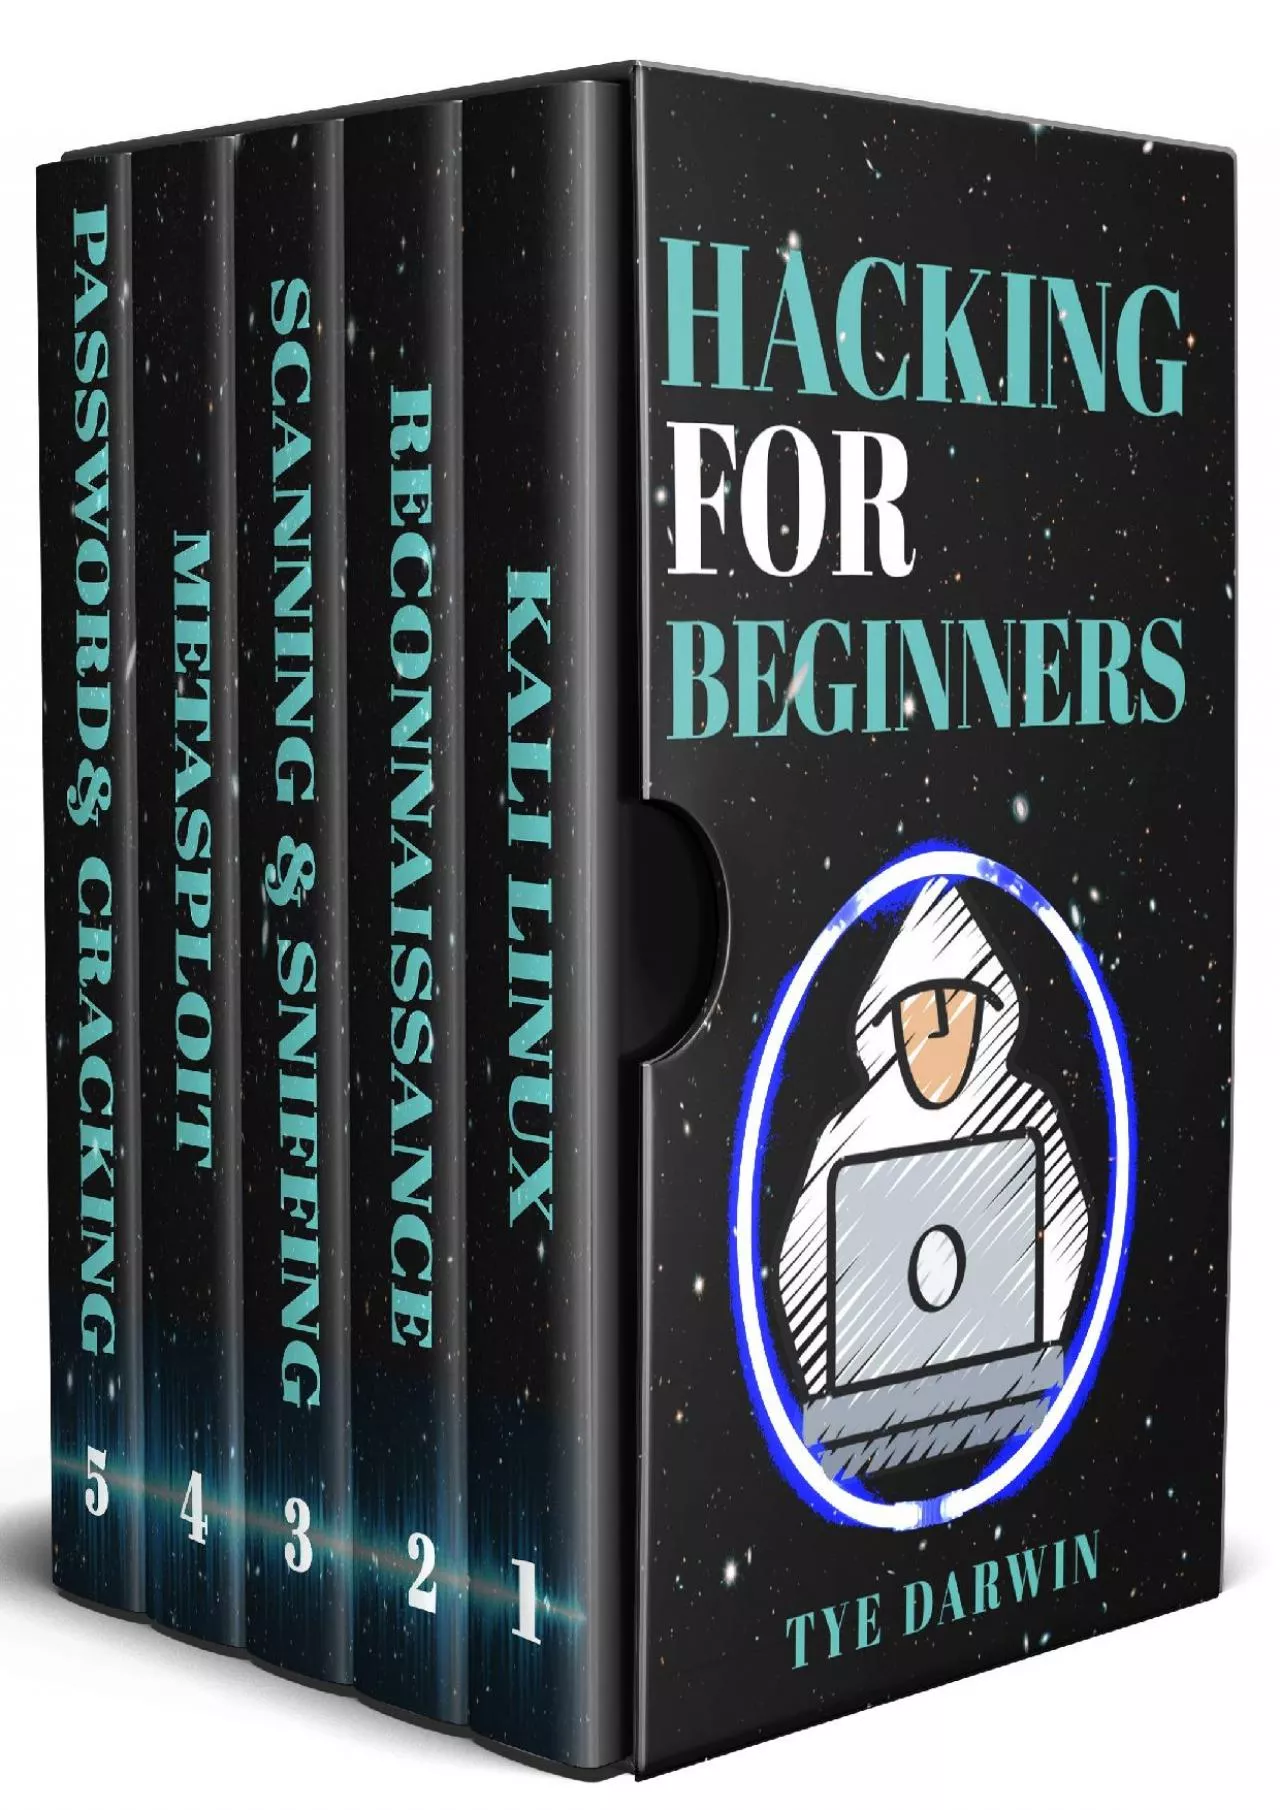 (EBOOK)-HACKING FOR BEGINNERS WITH KALI LINUX: LEARN KALI LINUX AND MASTER TOOLS TO CRACK